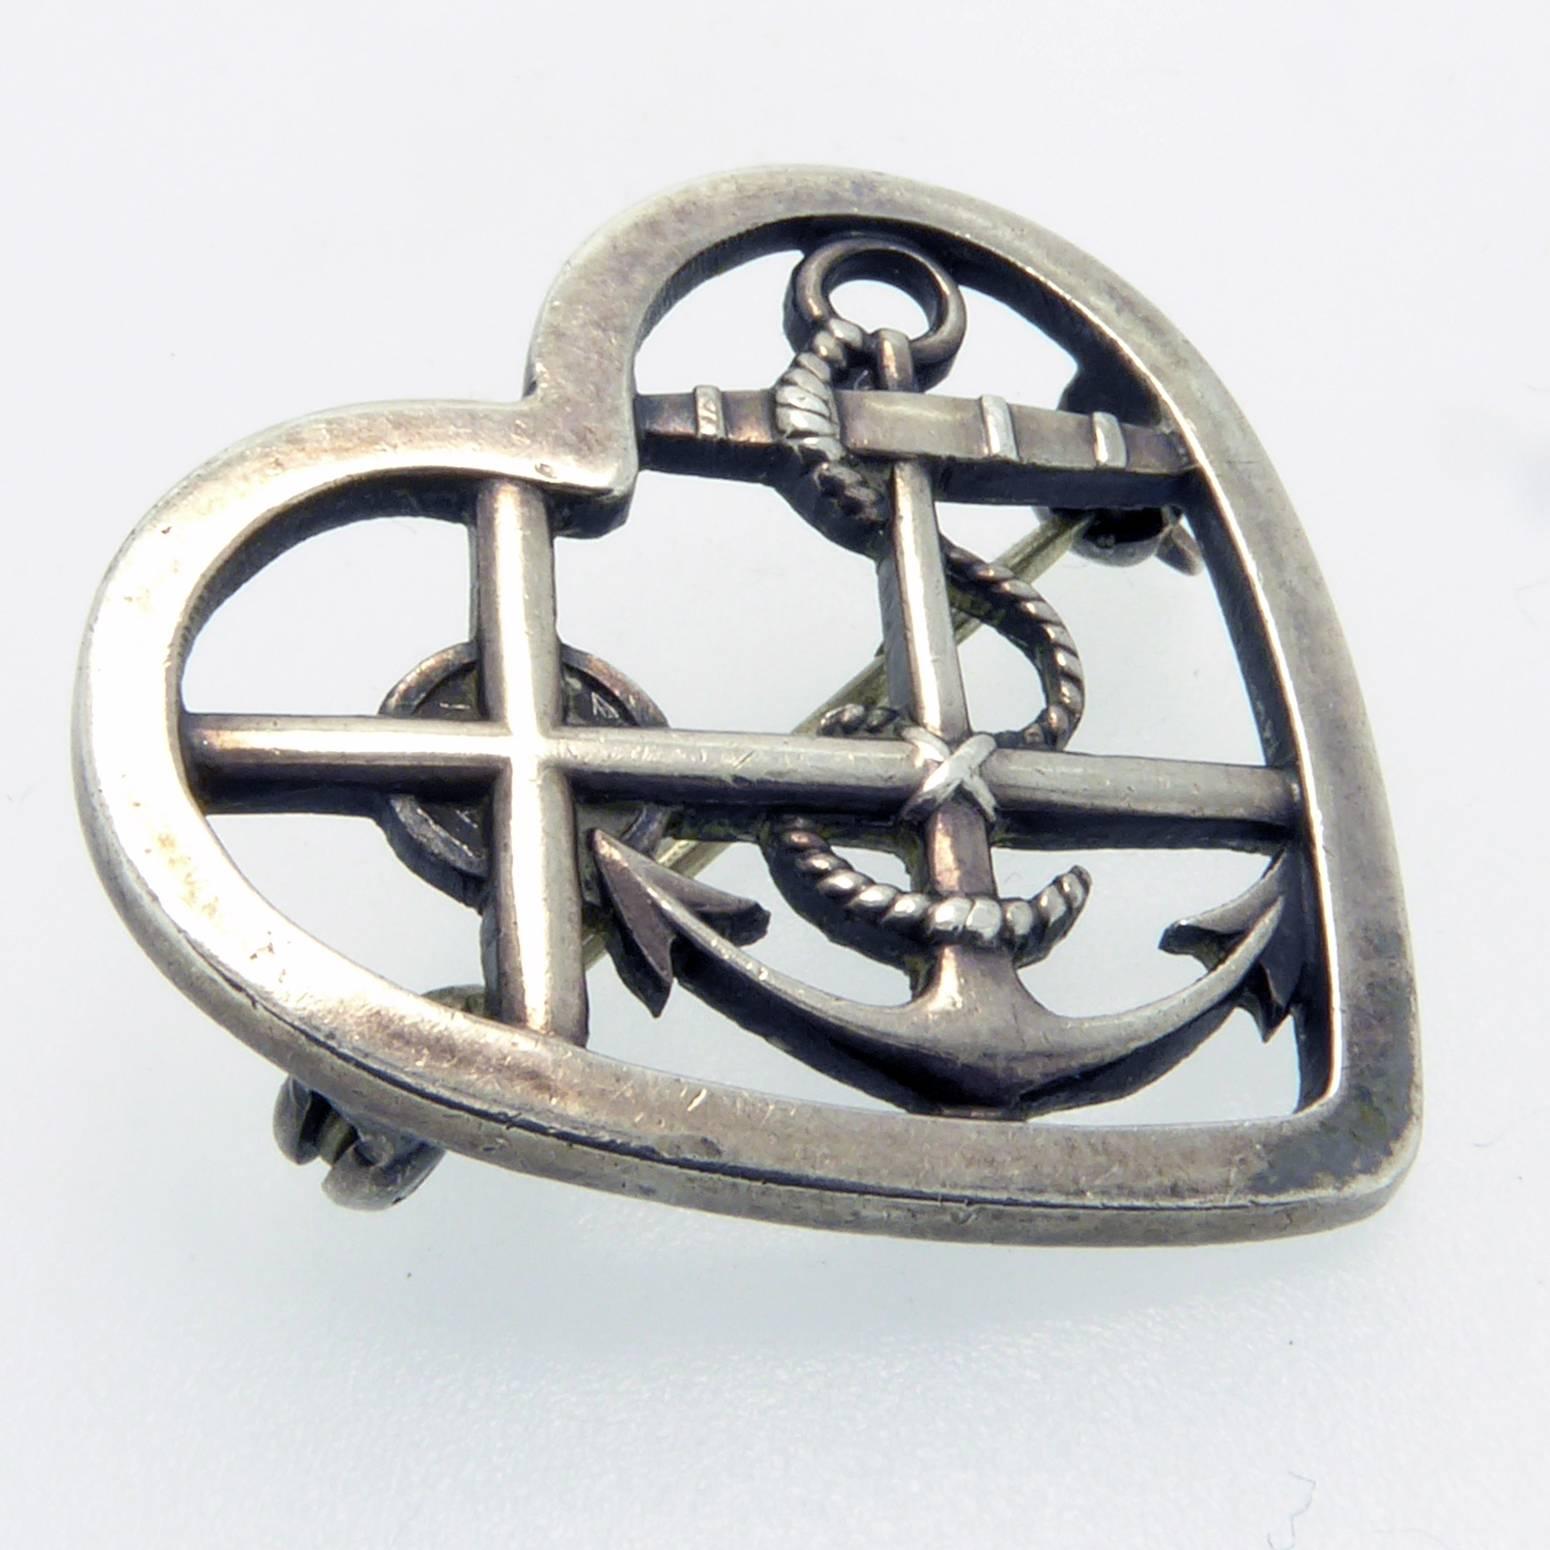 A very pretty vintage silver brooch by the Jensen designer, Wilhelm Albertus and known as design no. 296 Faith, Love, Hope. A rather nice patina has developed over years of careful use making the brooch worthy of adding to any Jensen vintage